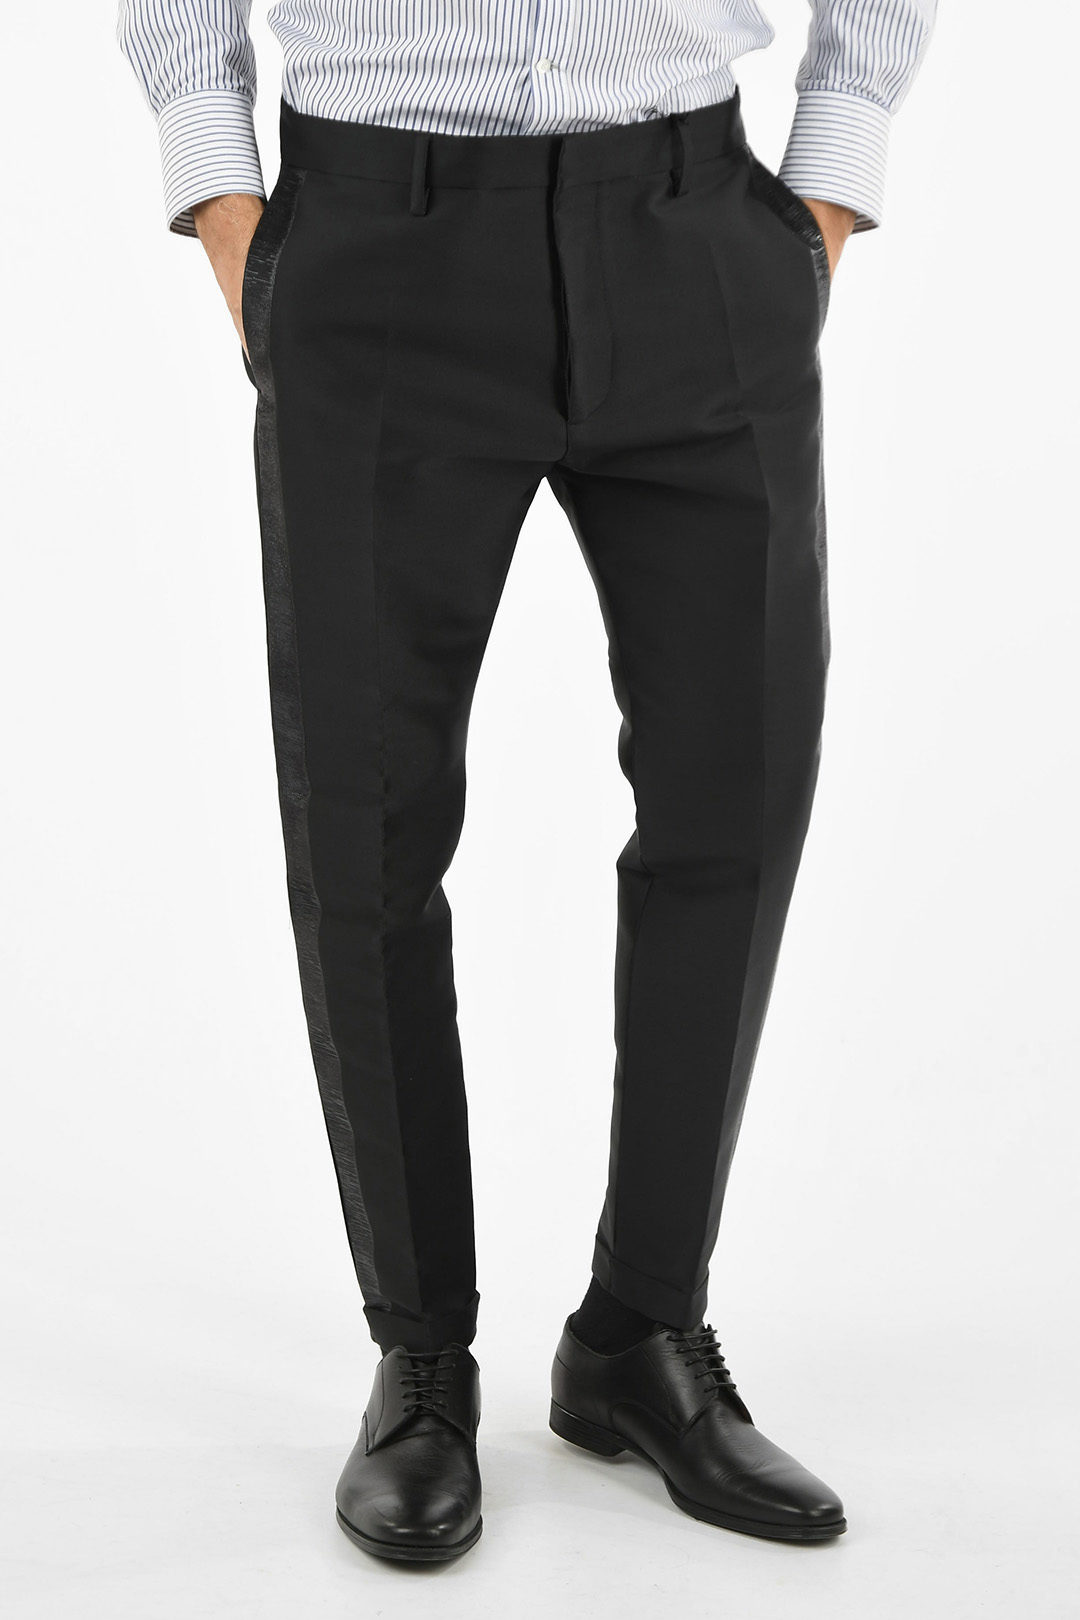 Dsquared2 Cuffed Hem Piping ADMIRAL FIT Pants men - Glamood Outlet